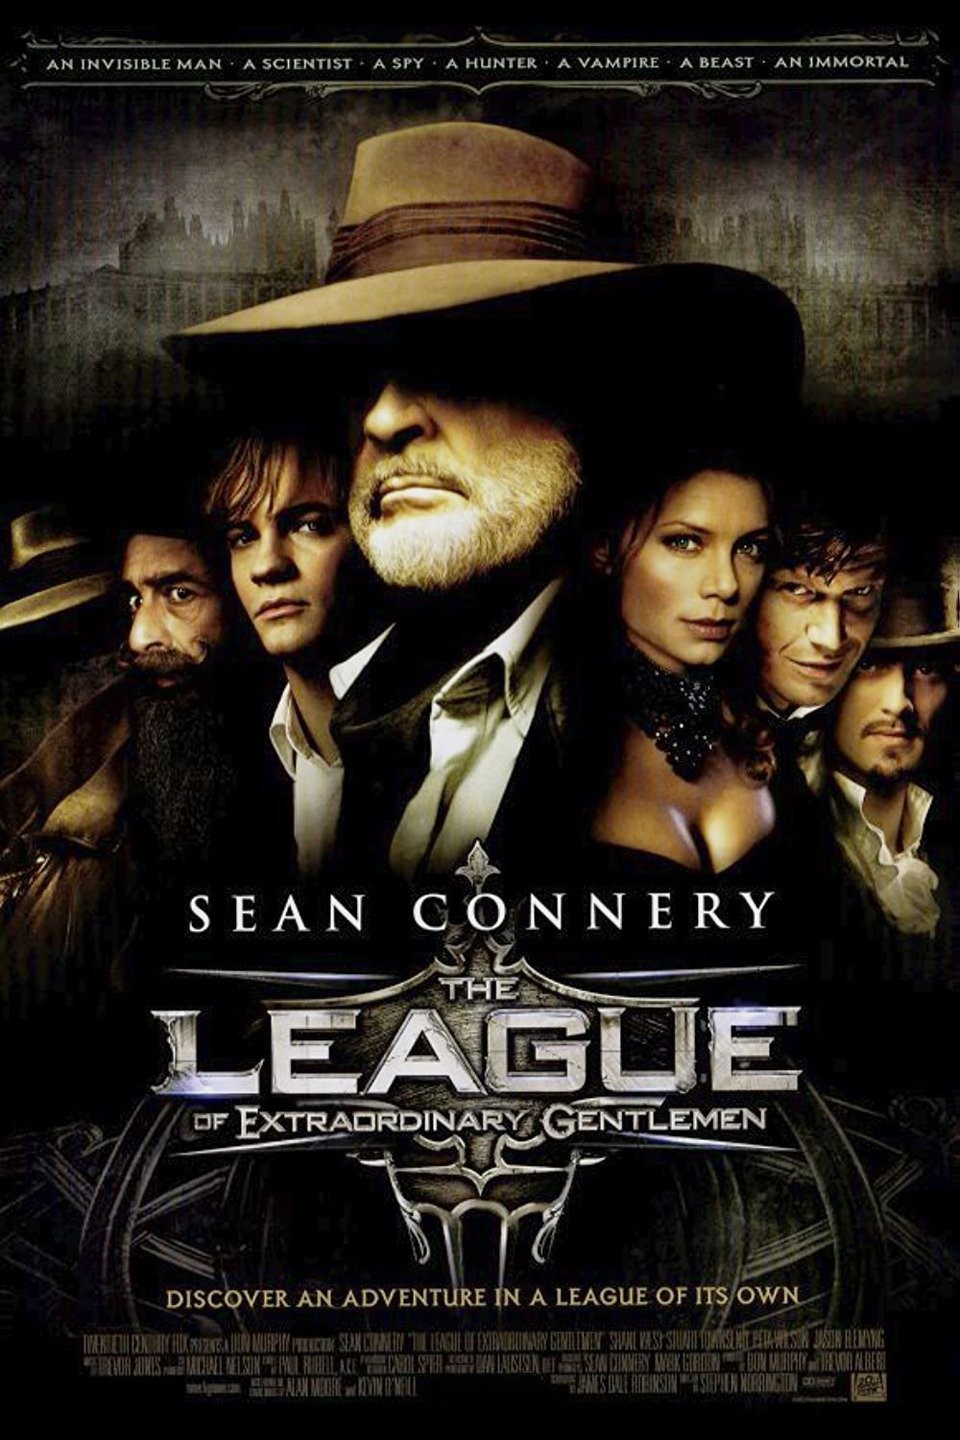 League of Legends (Video Game 2009) - IMDb